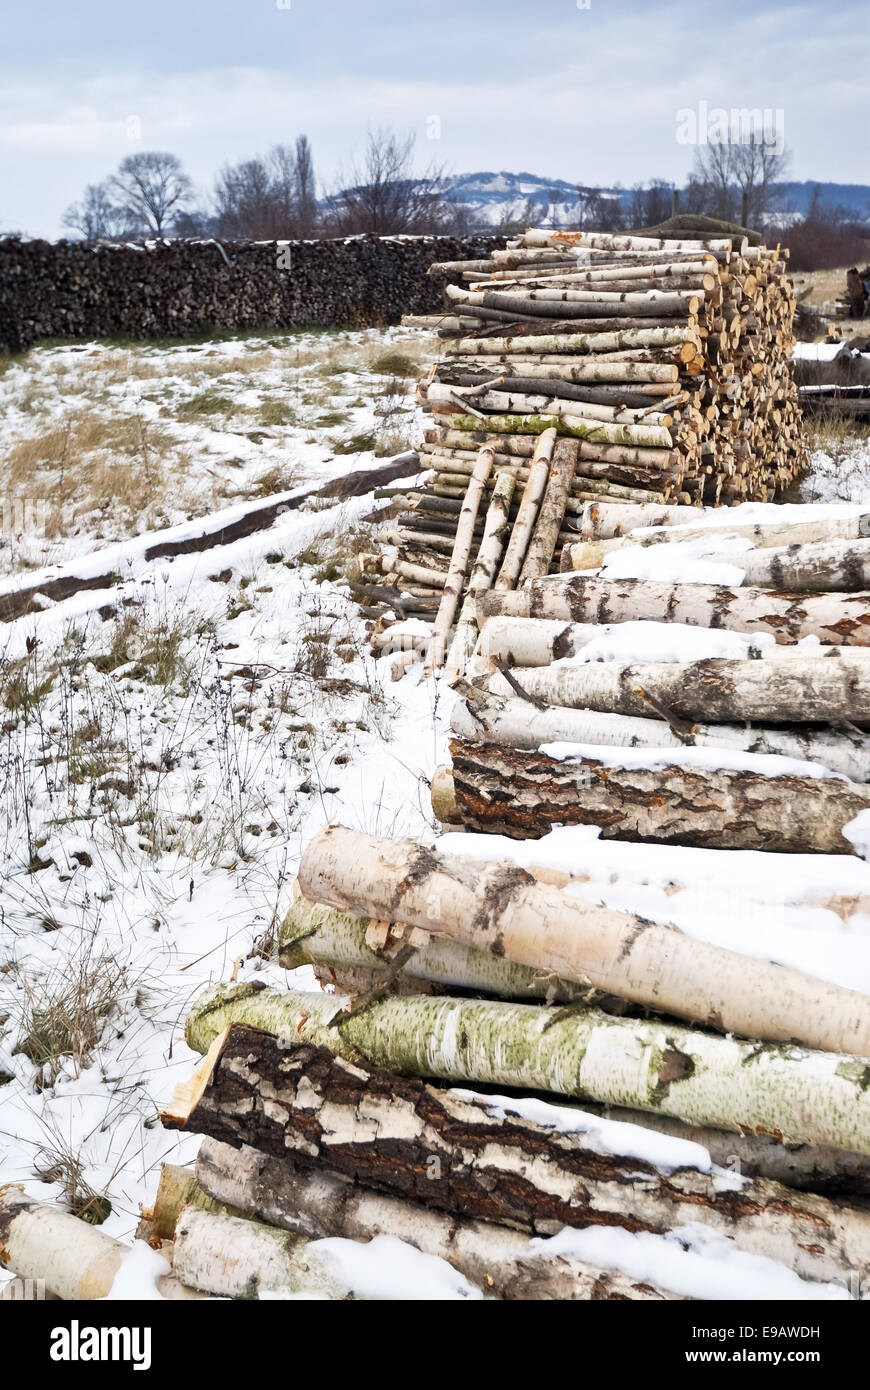 A stack of birchwood in the snow Stock Photo